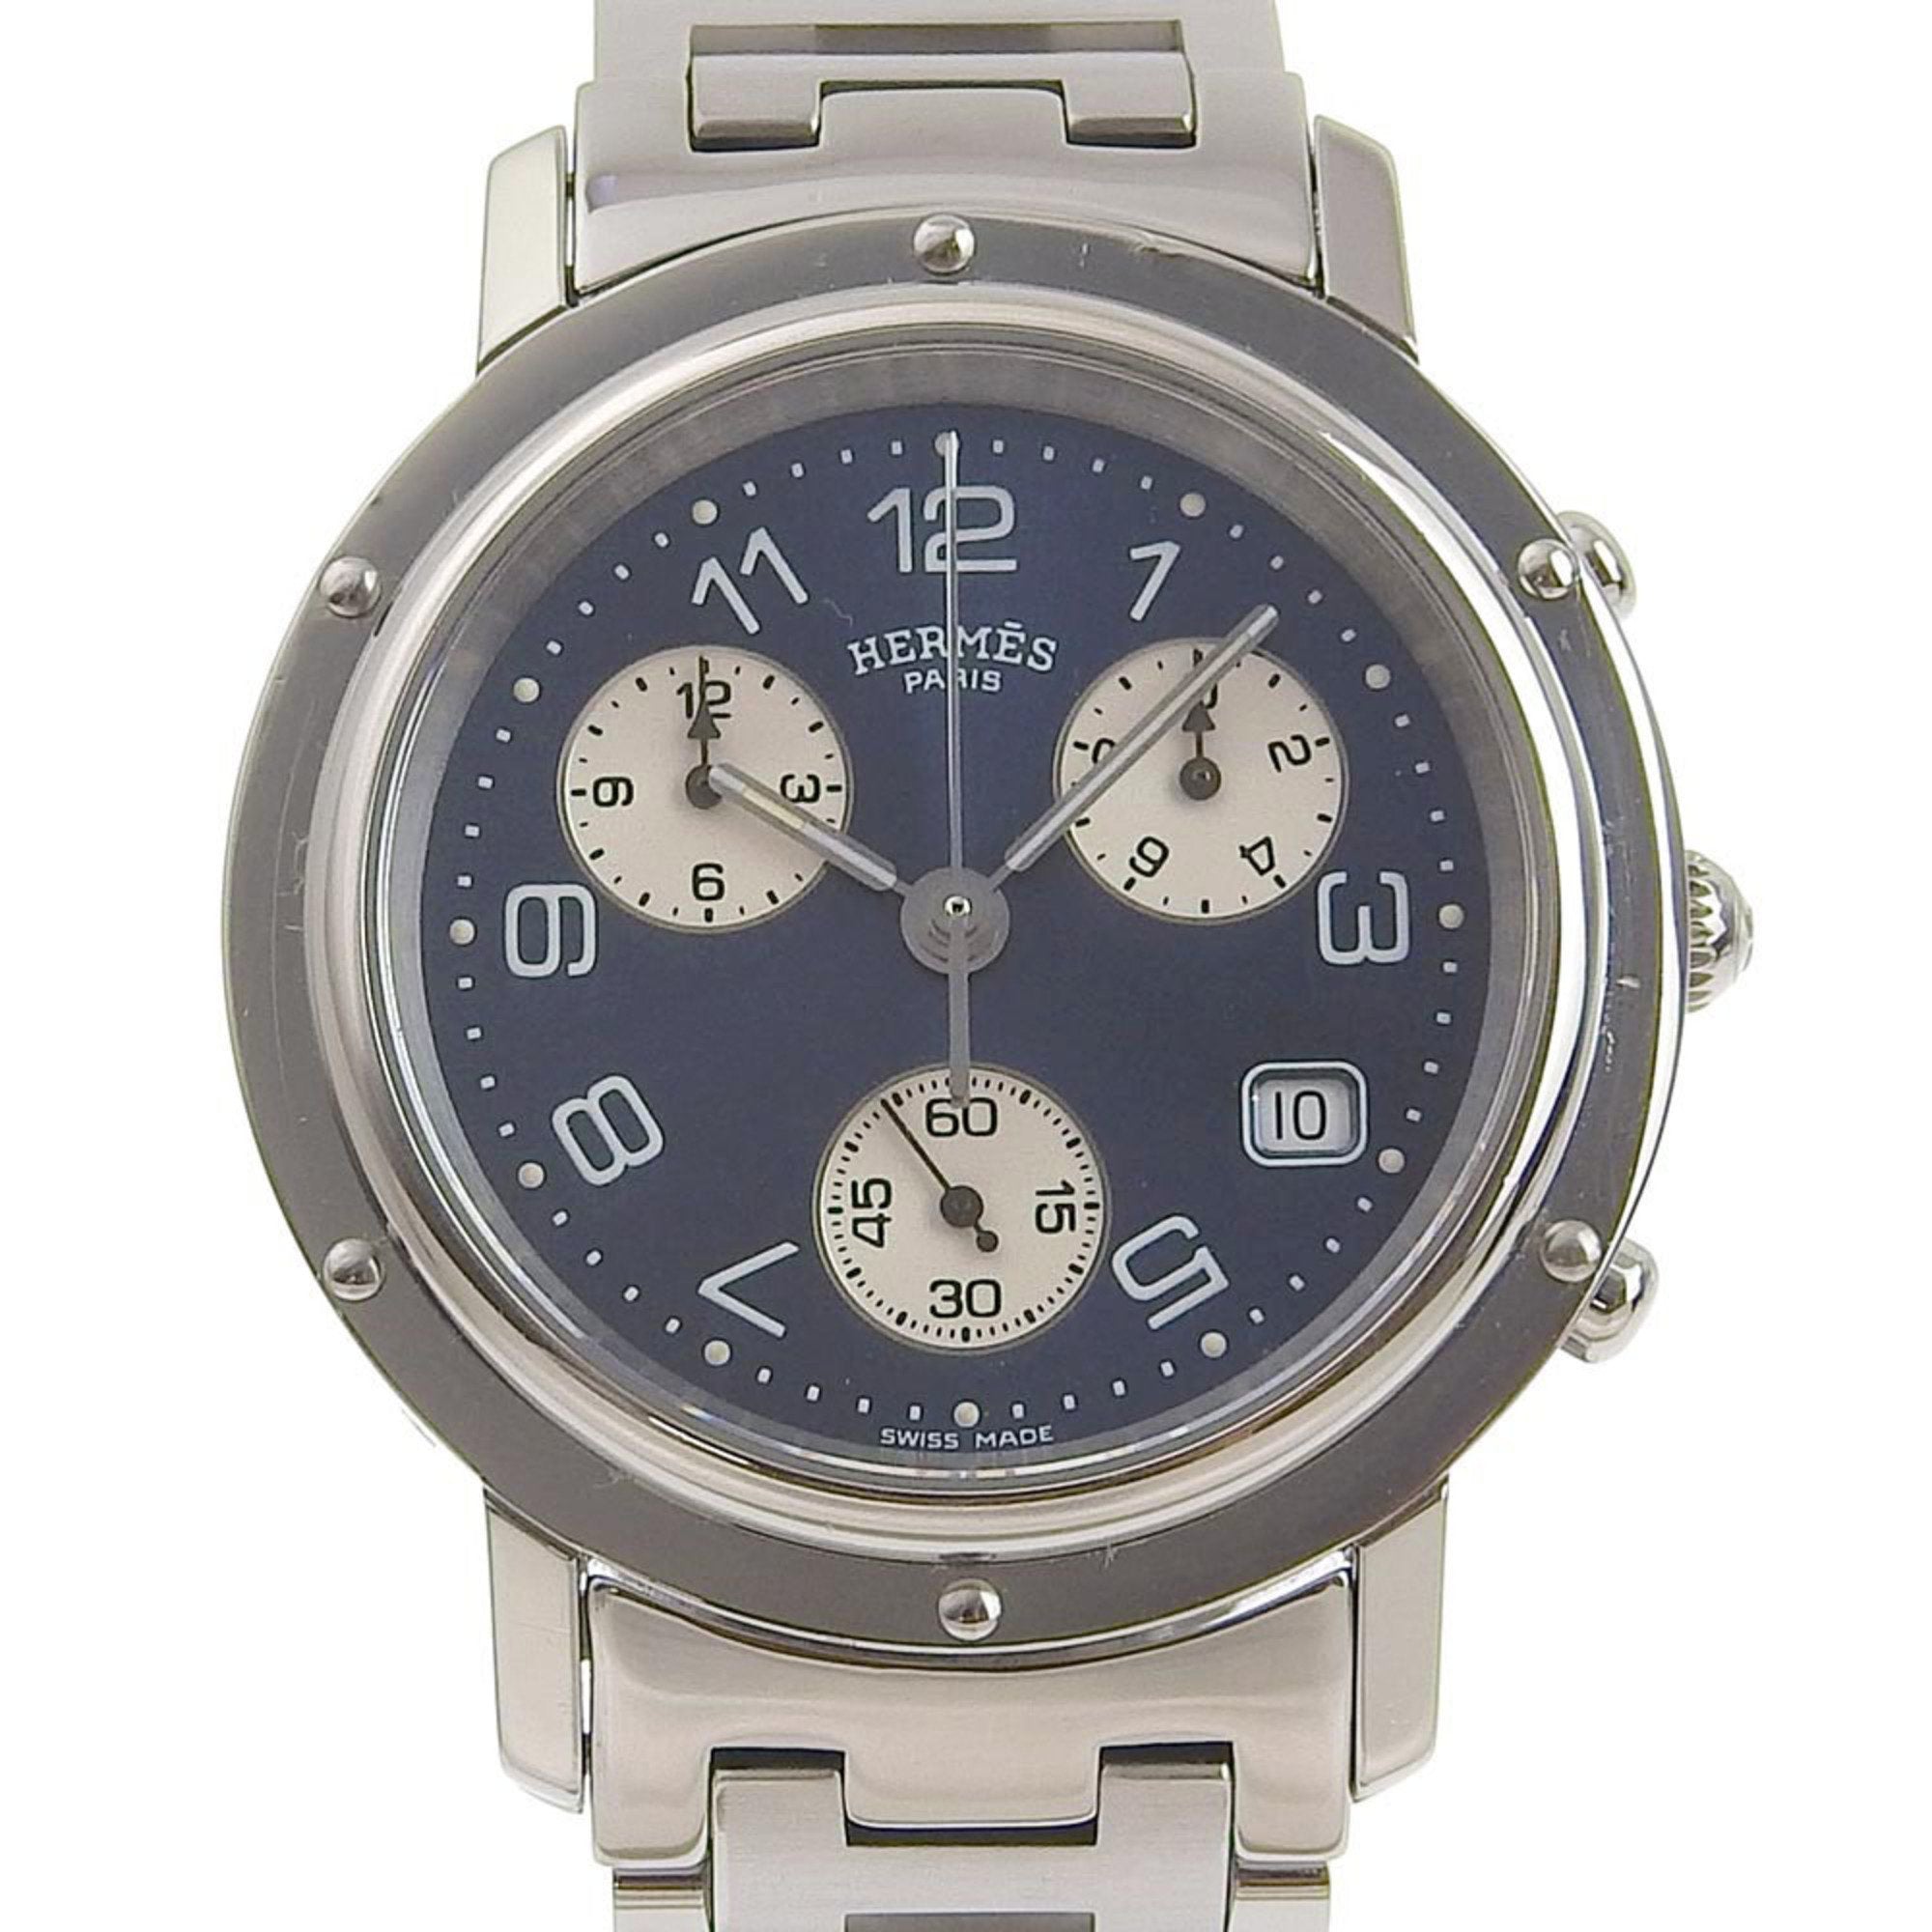 image of HERMES Clipper Watch CL1.910 Stainless Steel Swiss Made Silver Quartz Chronograph Navy Dial Men's